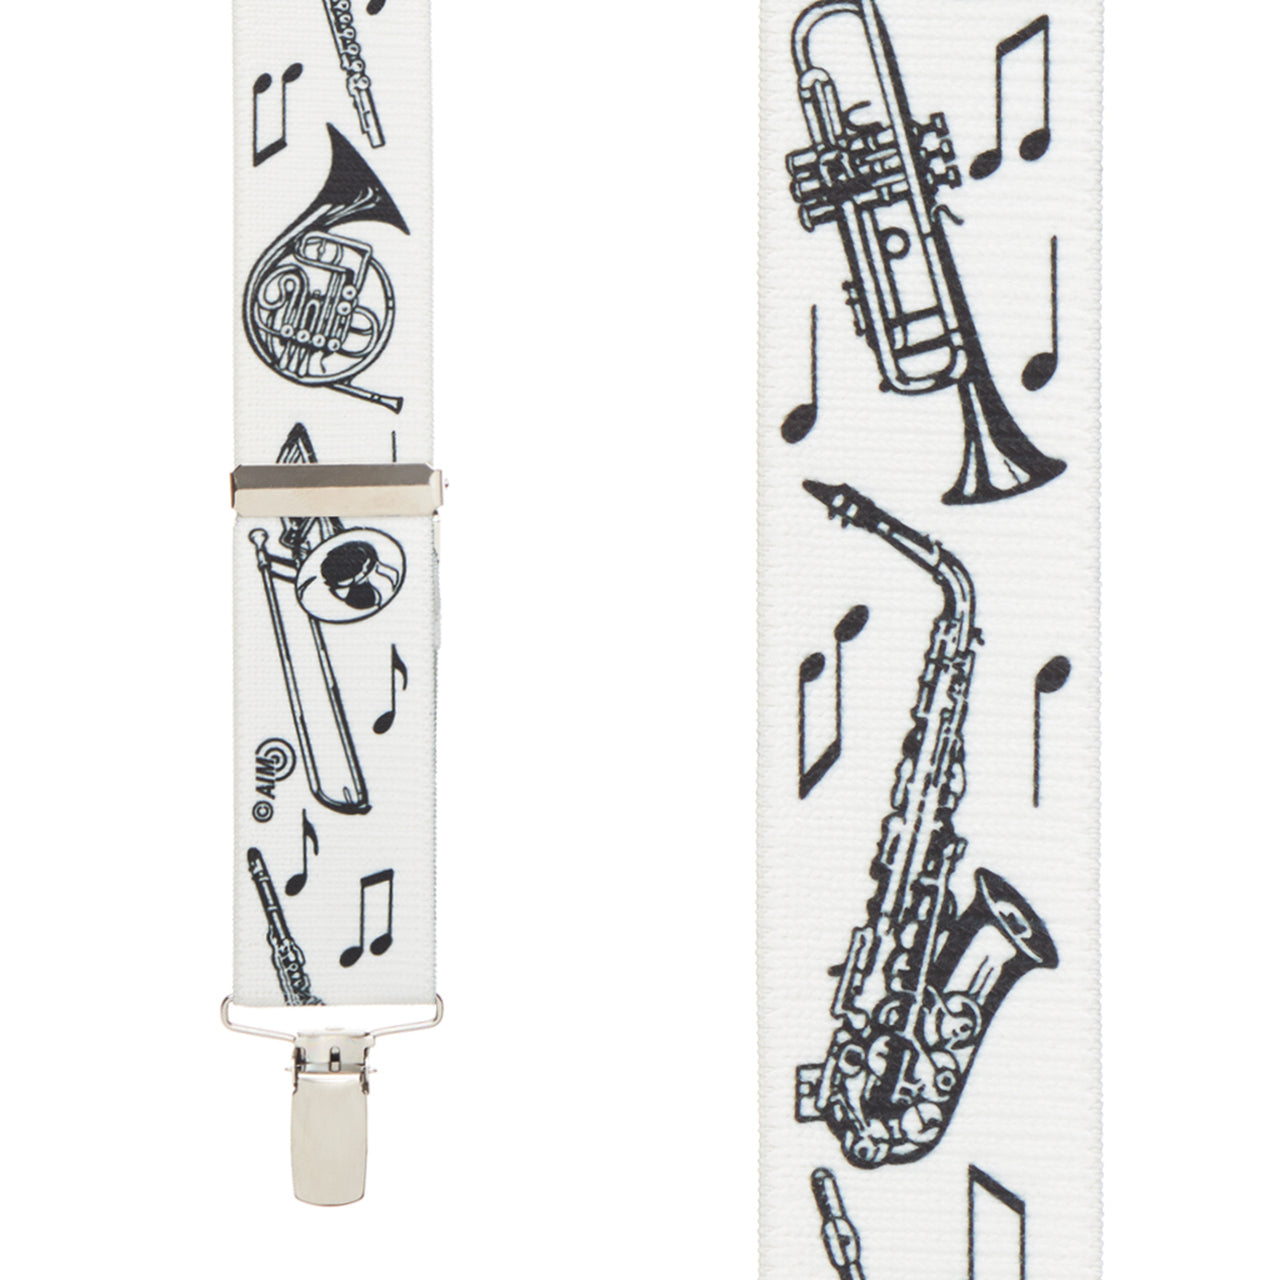 Musical Instruments Suspenders-Made in the USA